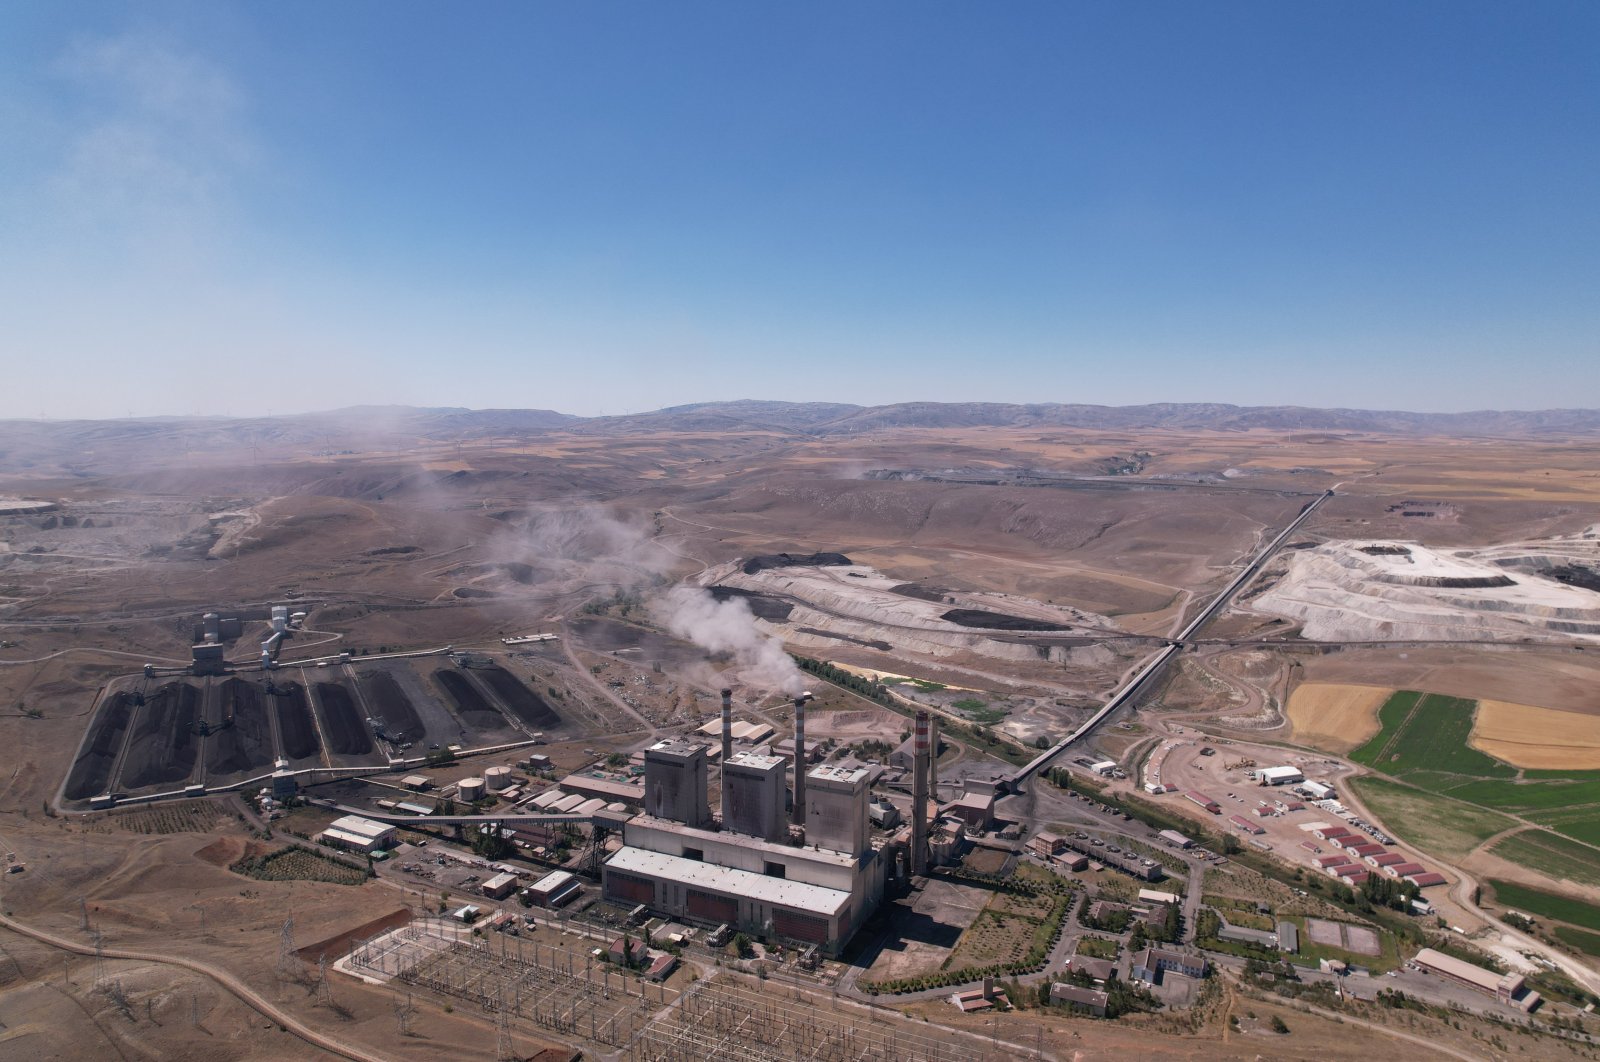 A view of a coal storage area and coal power plant in Sivas province, central Turkey, Aug. 19, 2021. (Courtesy of Europe Beyond Coal)